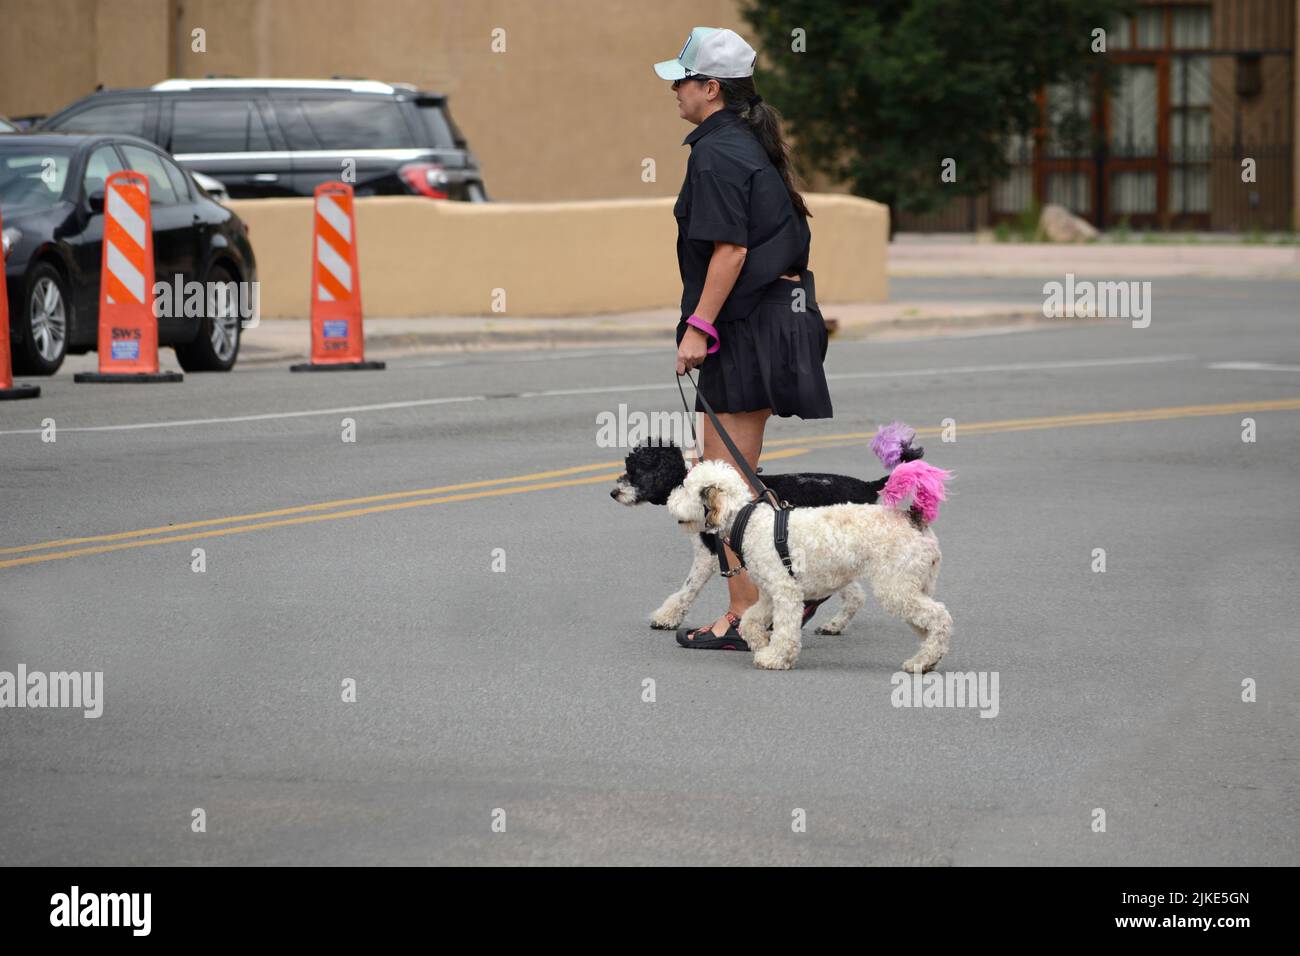 A woman crosses a street with her two pet dogs with colored tails in Santa Fe, New Mexico. Stock Photo